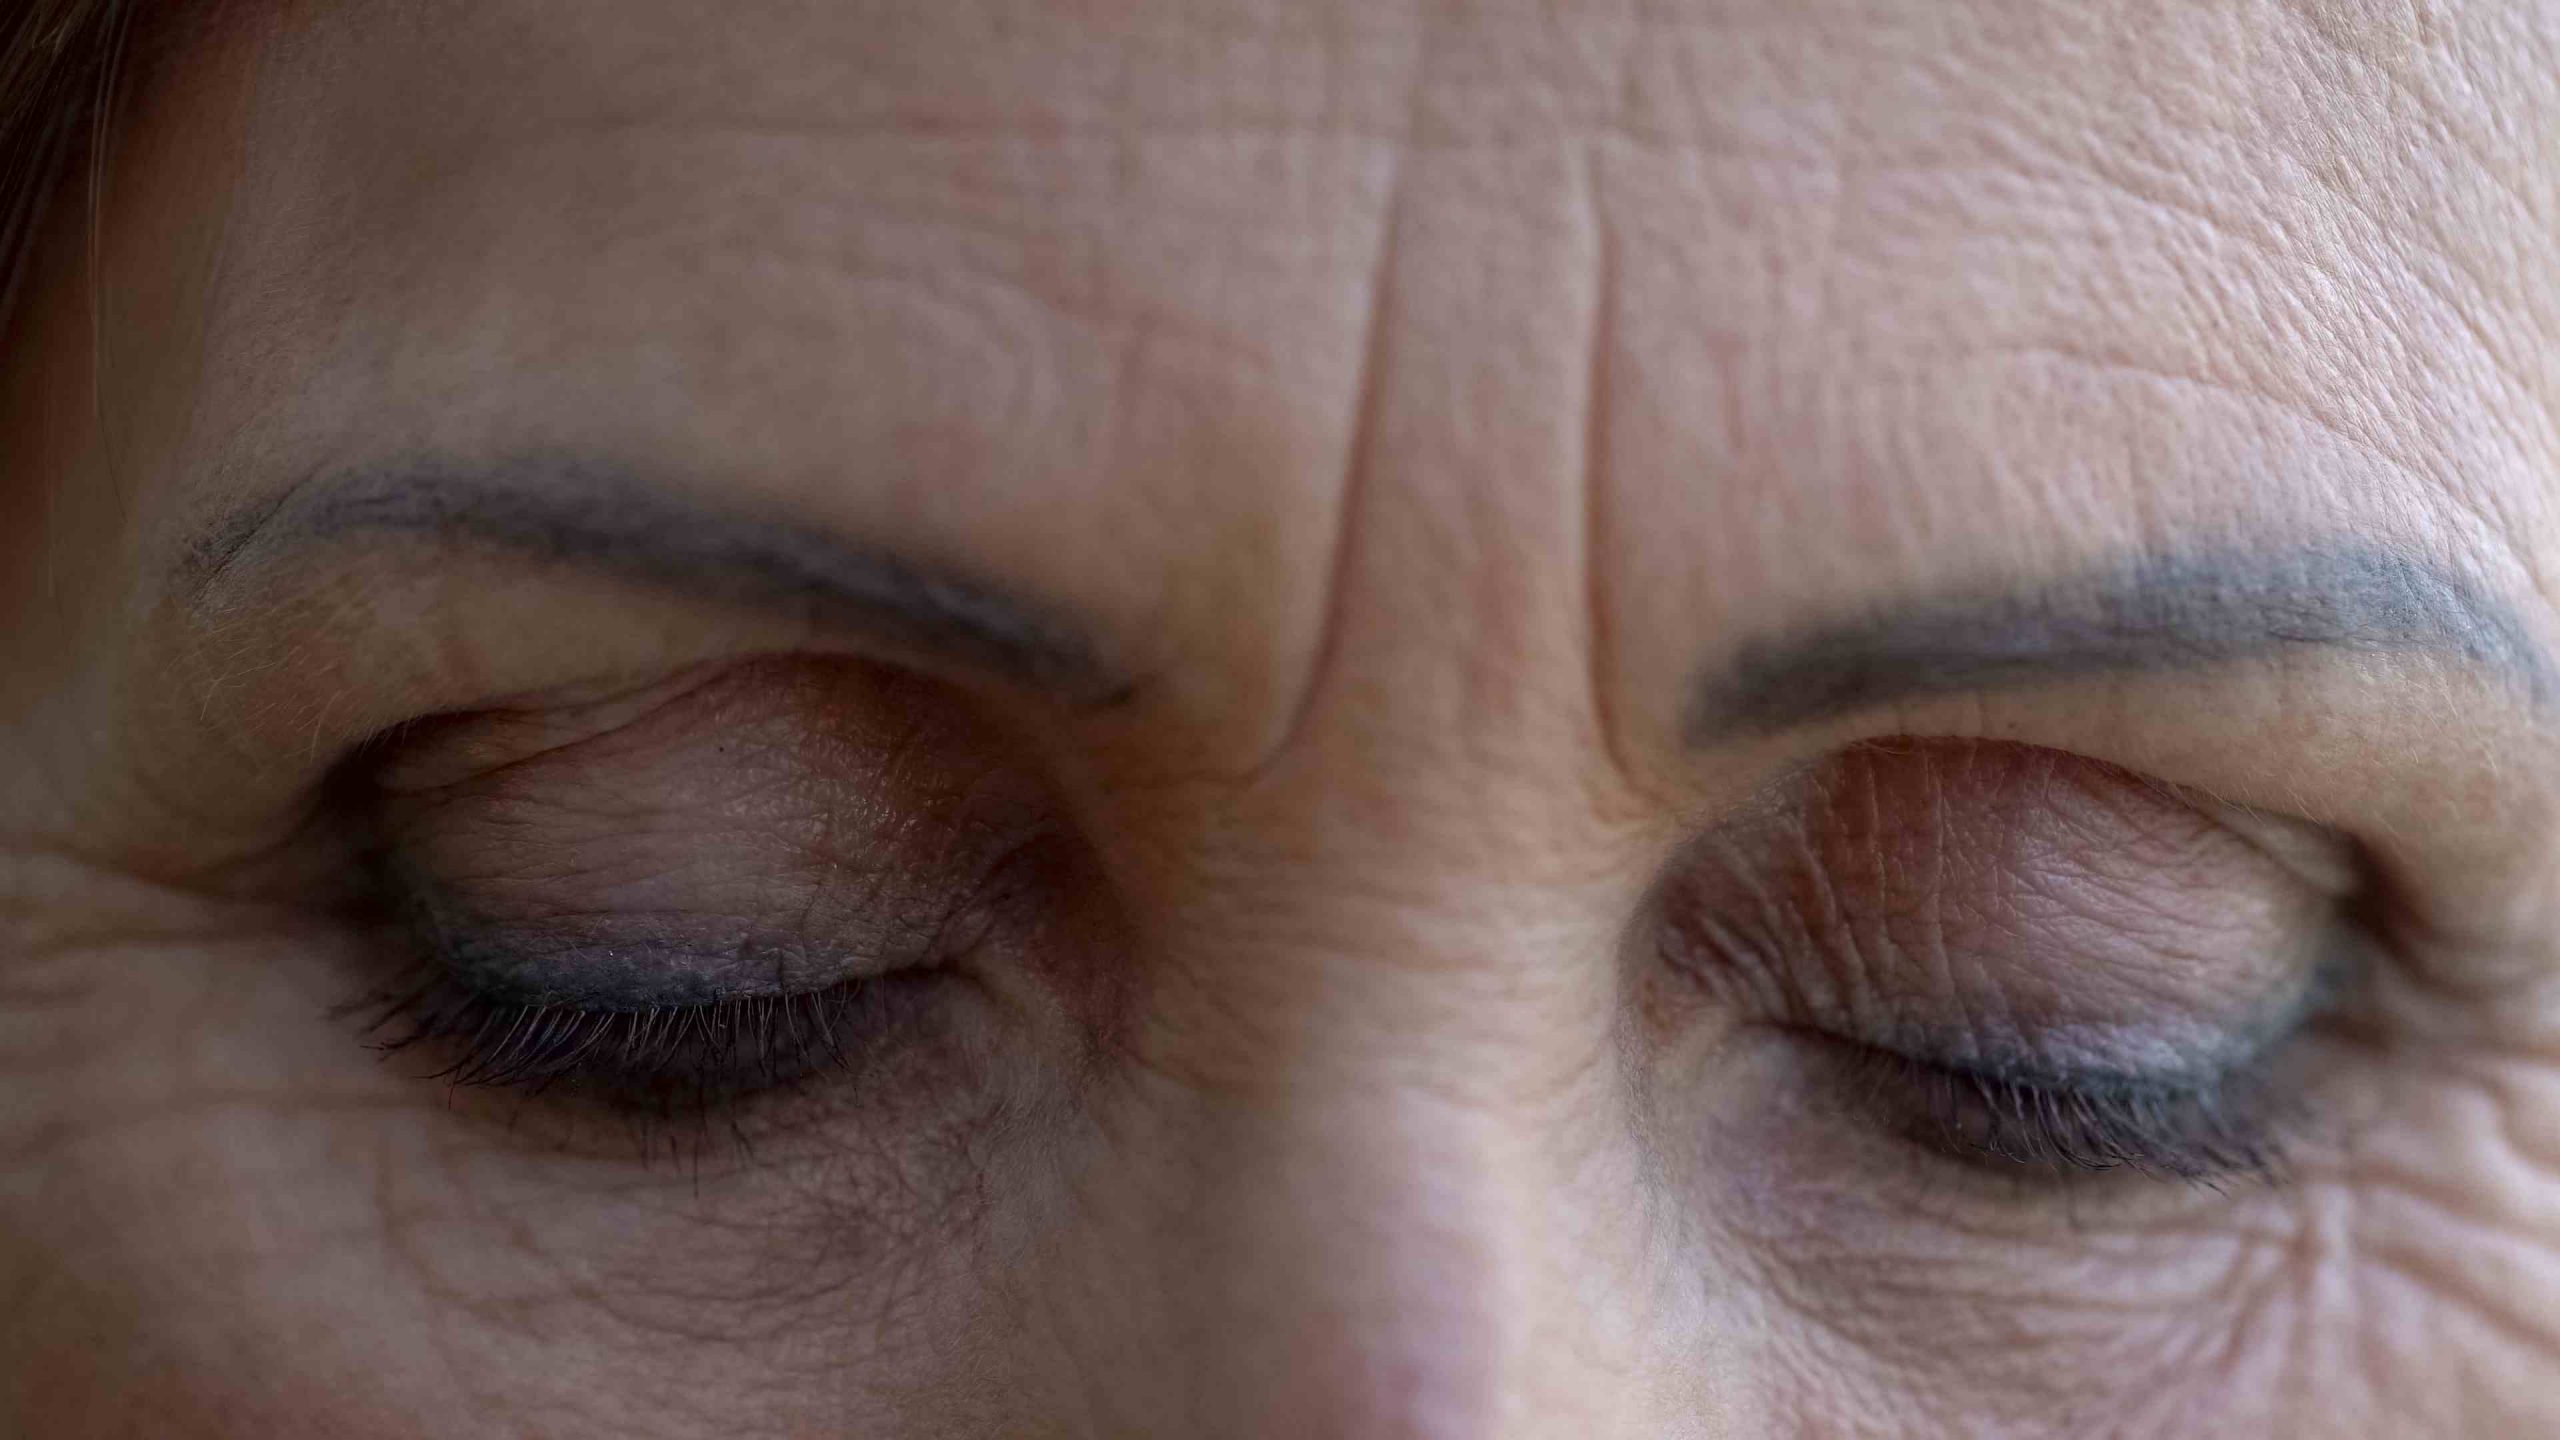 A photo of a middle-aged woman with deep wrinkles around the eyes and forehead before skin treatments.